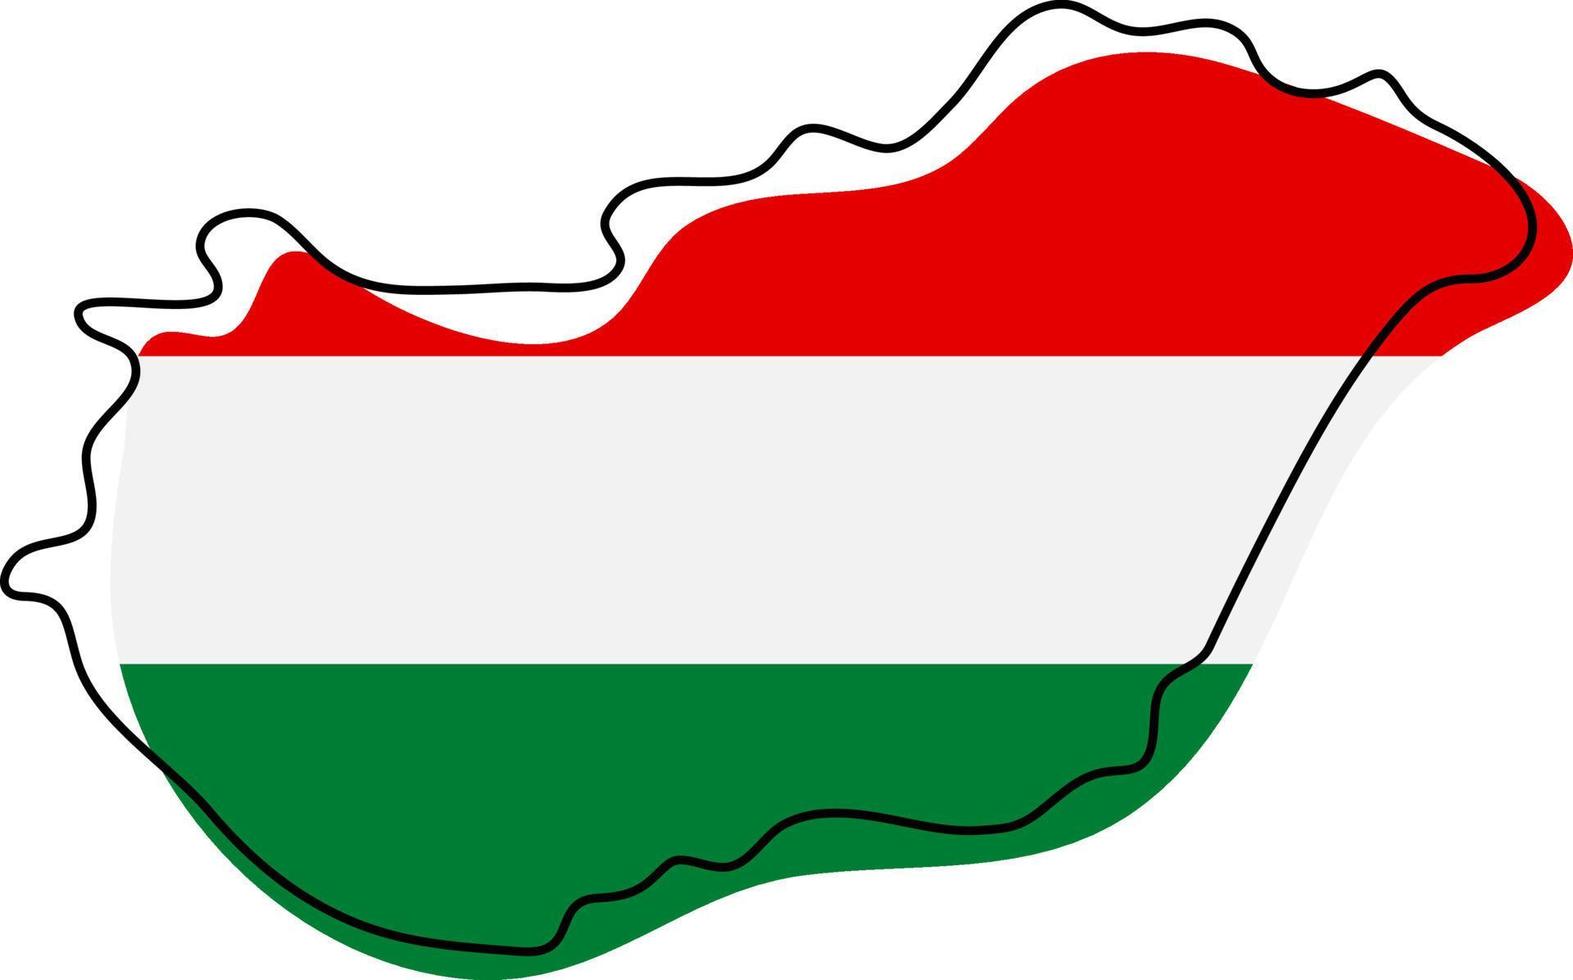 Stylized outline map of Hungary with national flag icon. Flag color map of Hungary vector illustration.